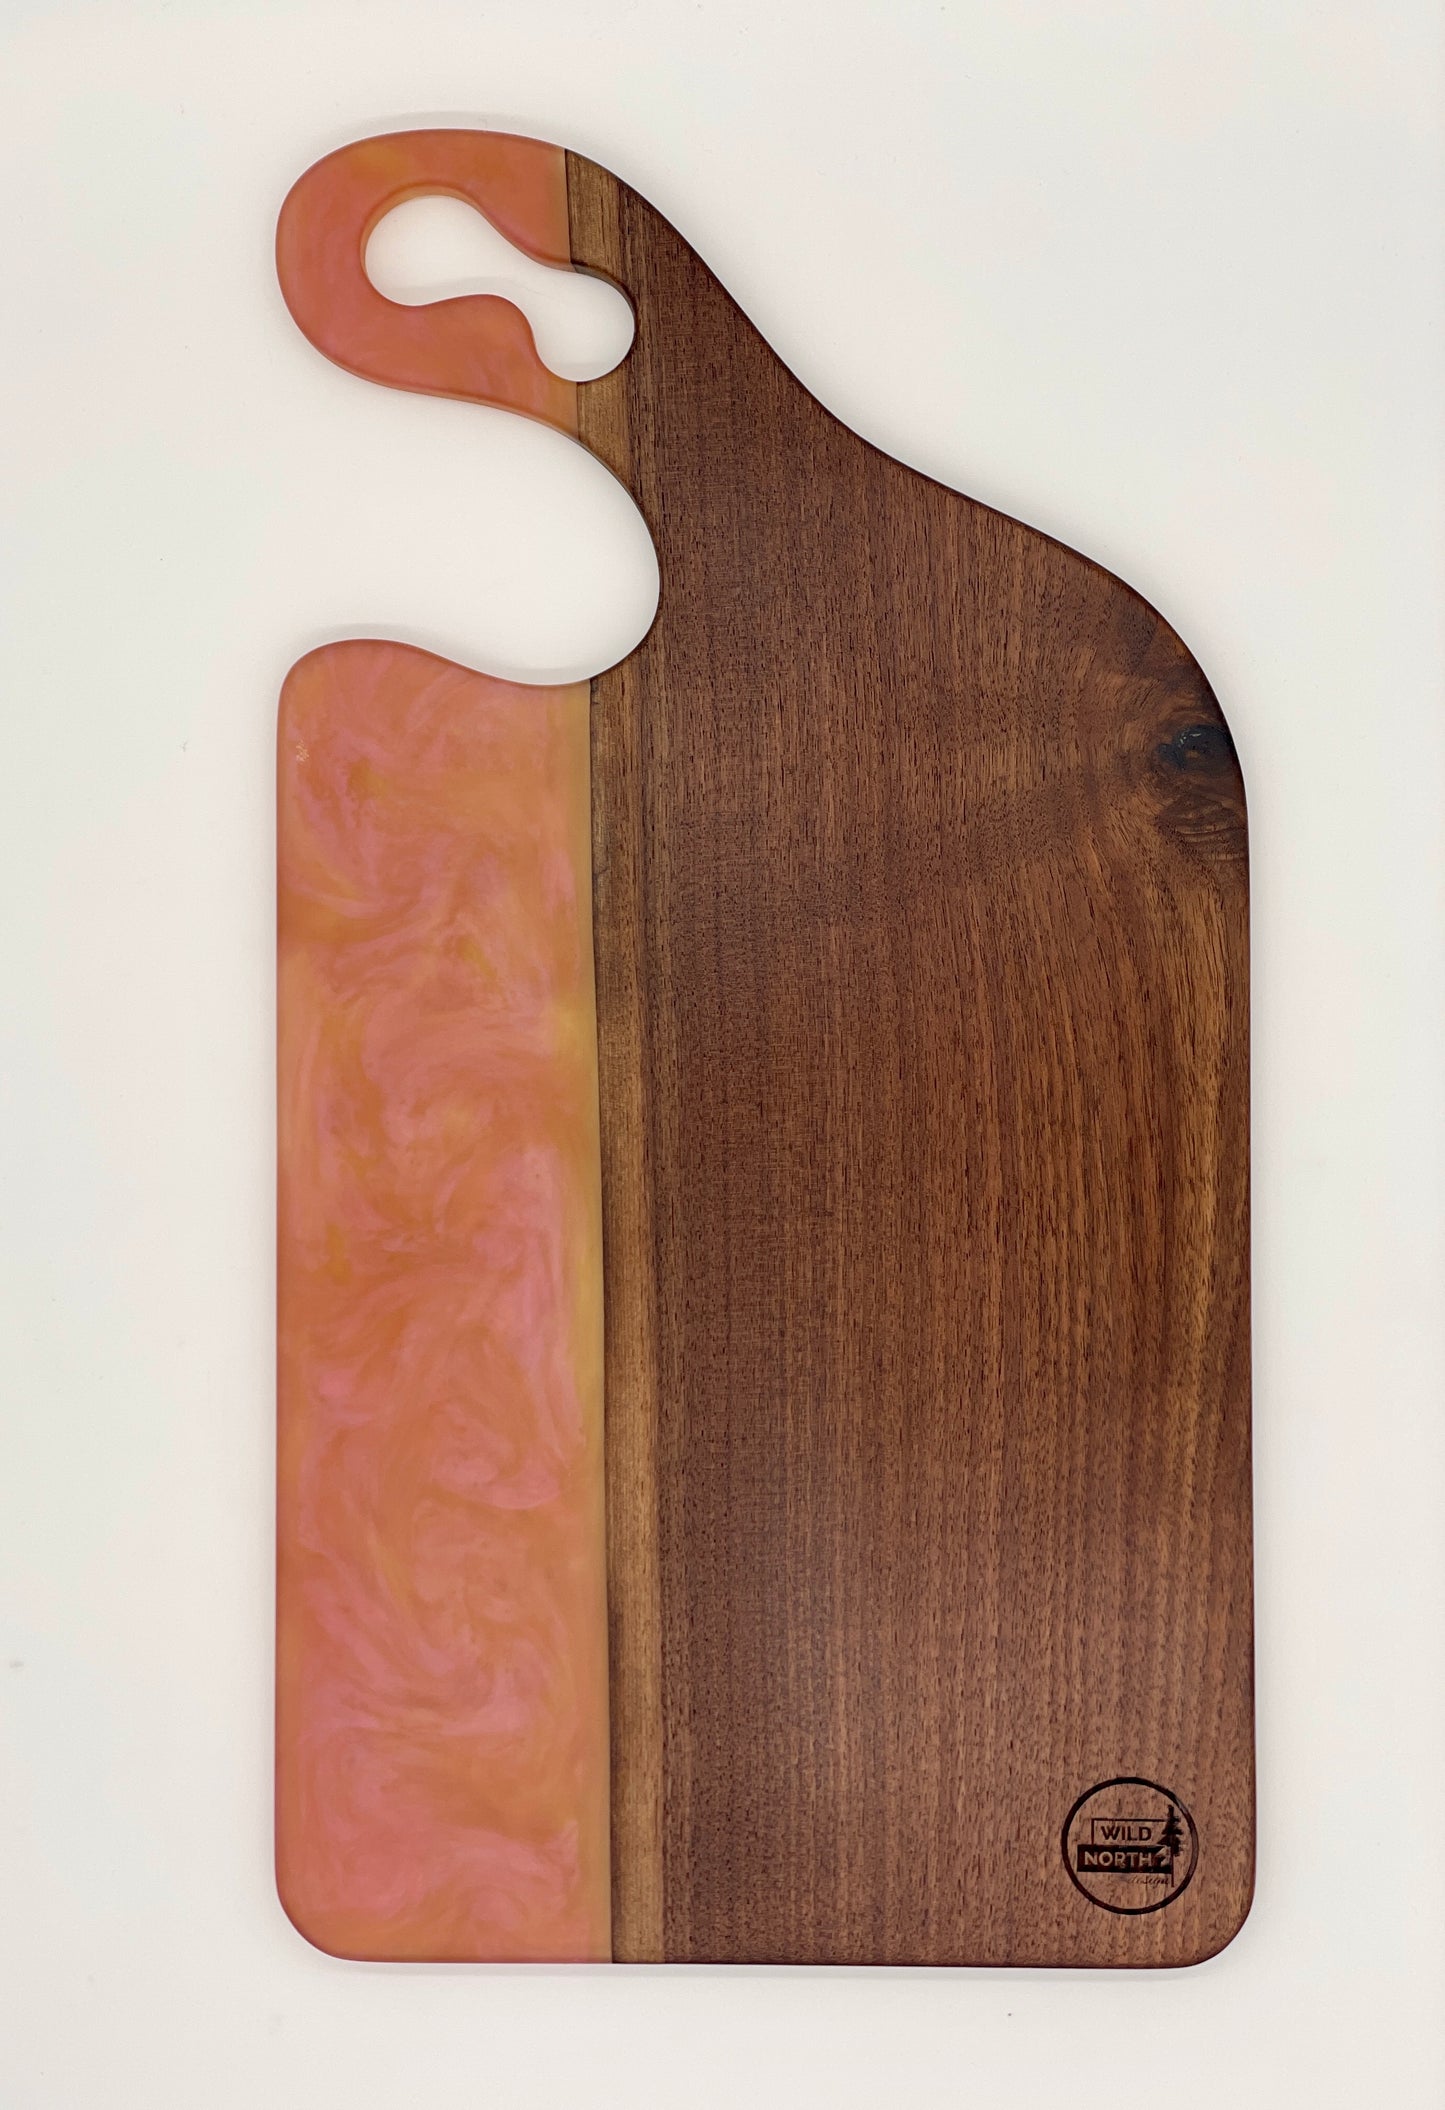 Walnut board with translucent pink resin